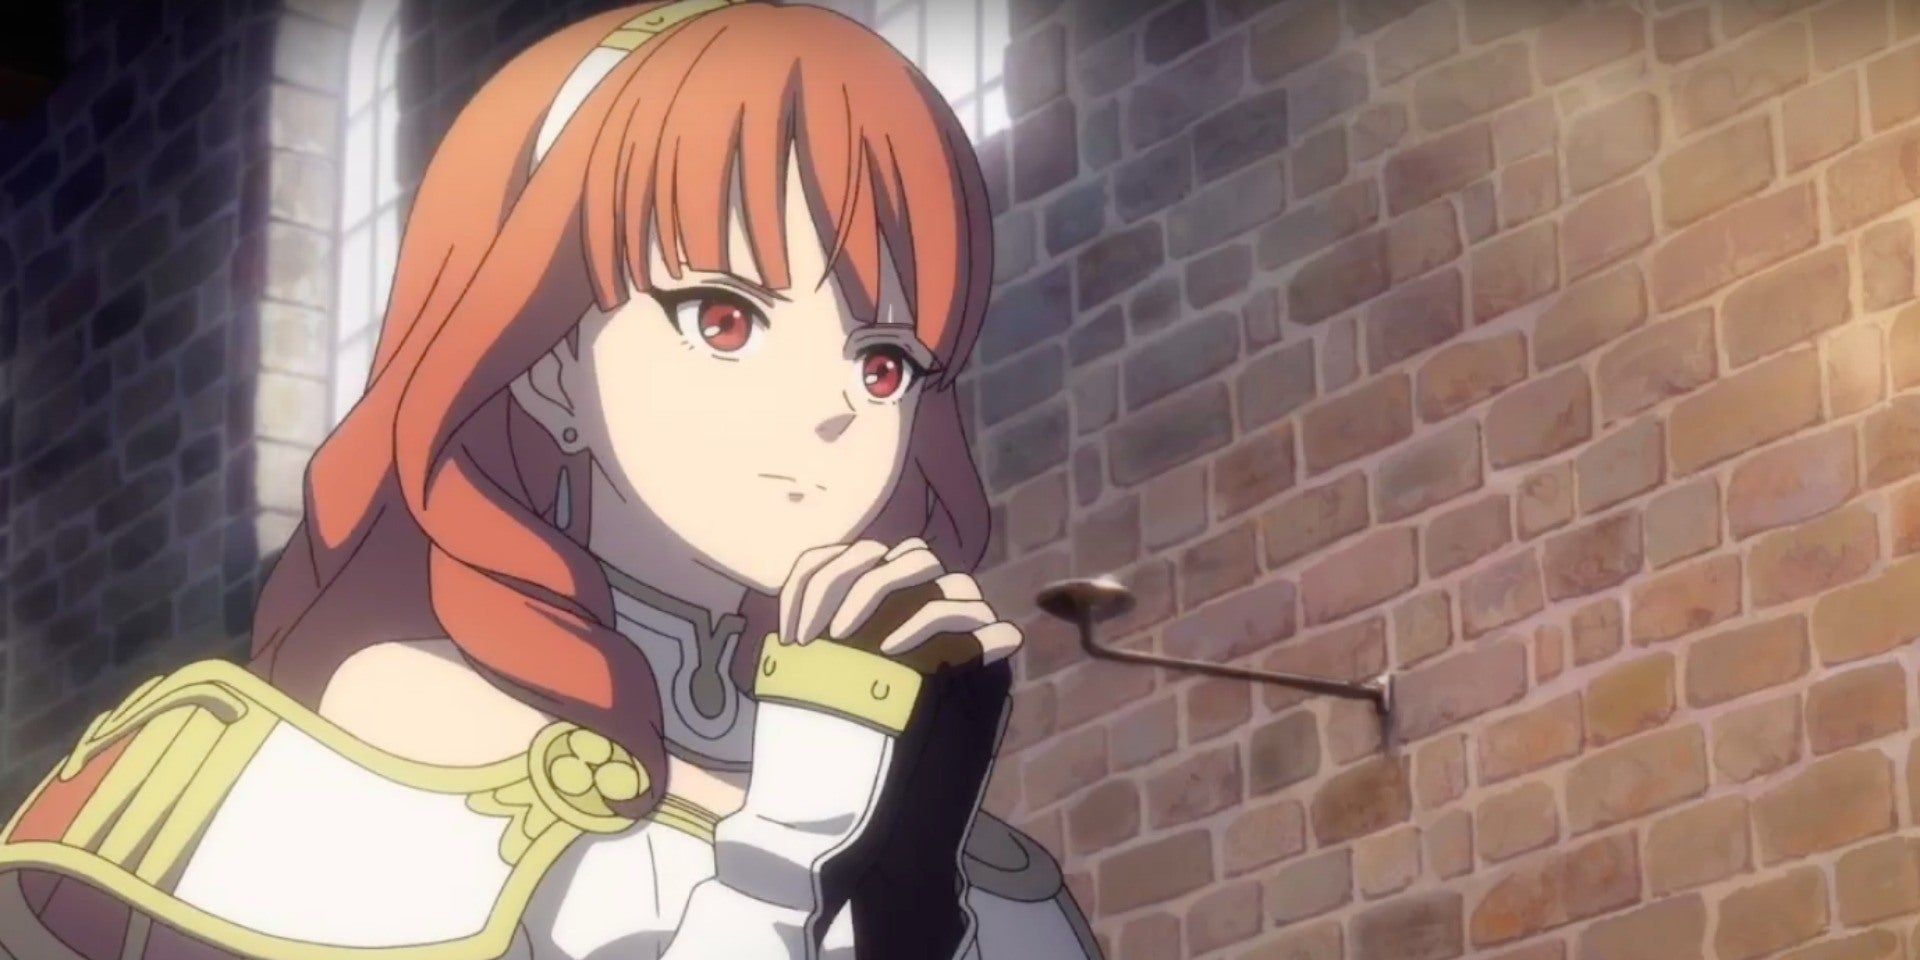 Celica clasping her hands together in Fire Emblem Echoes: Shadows of Valentia